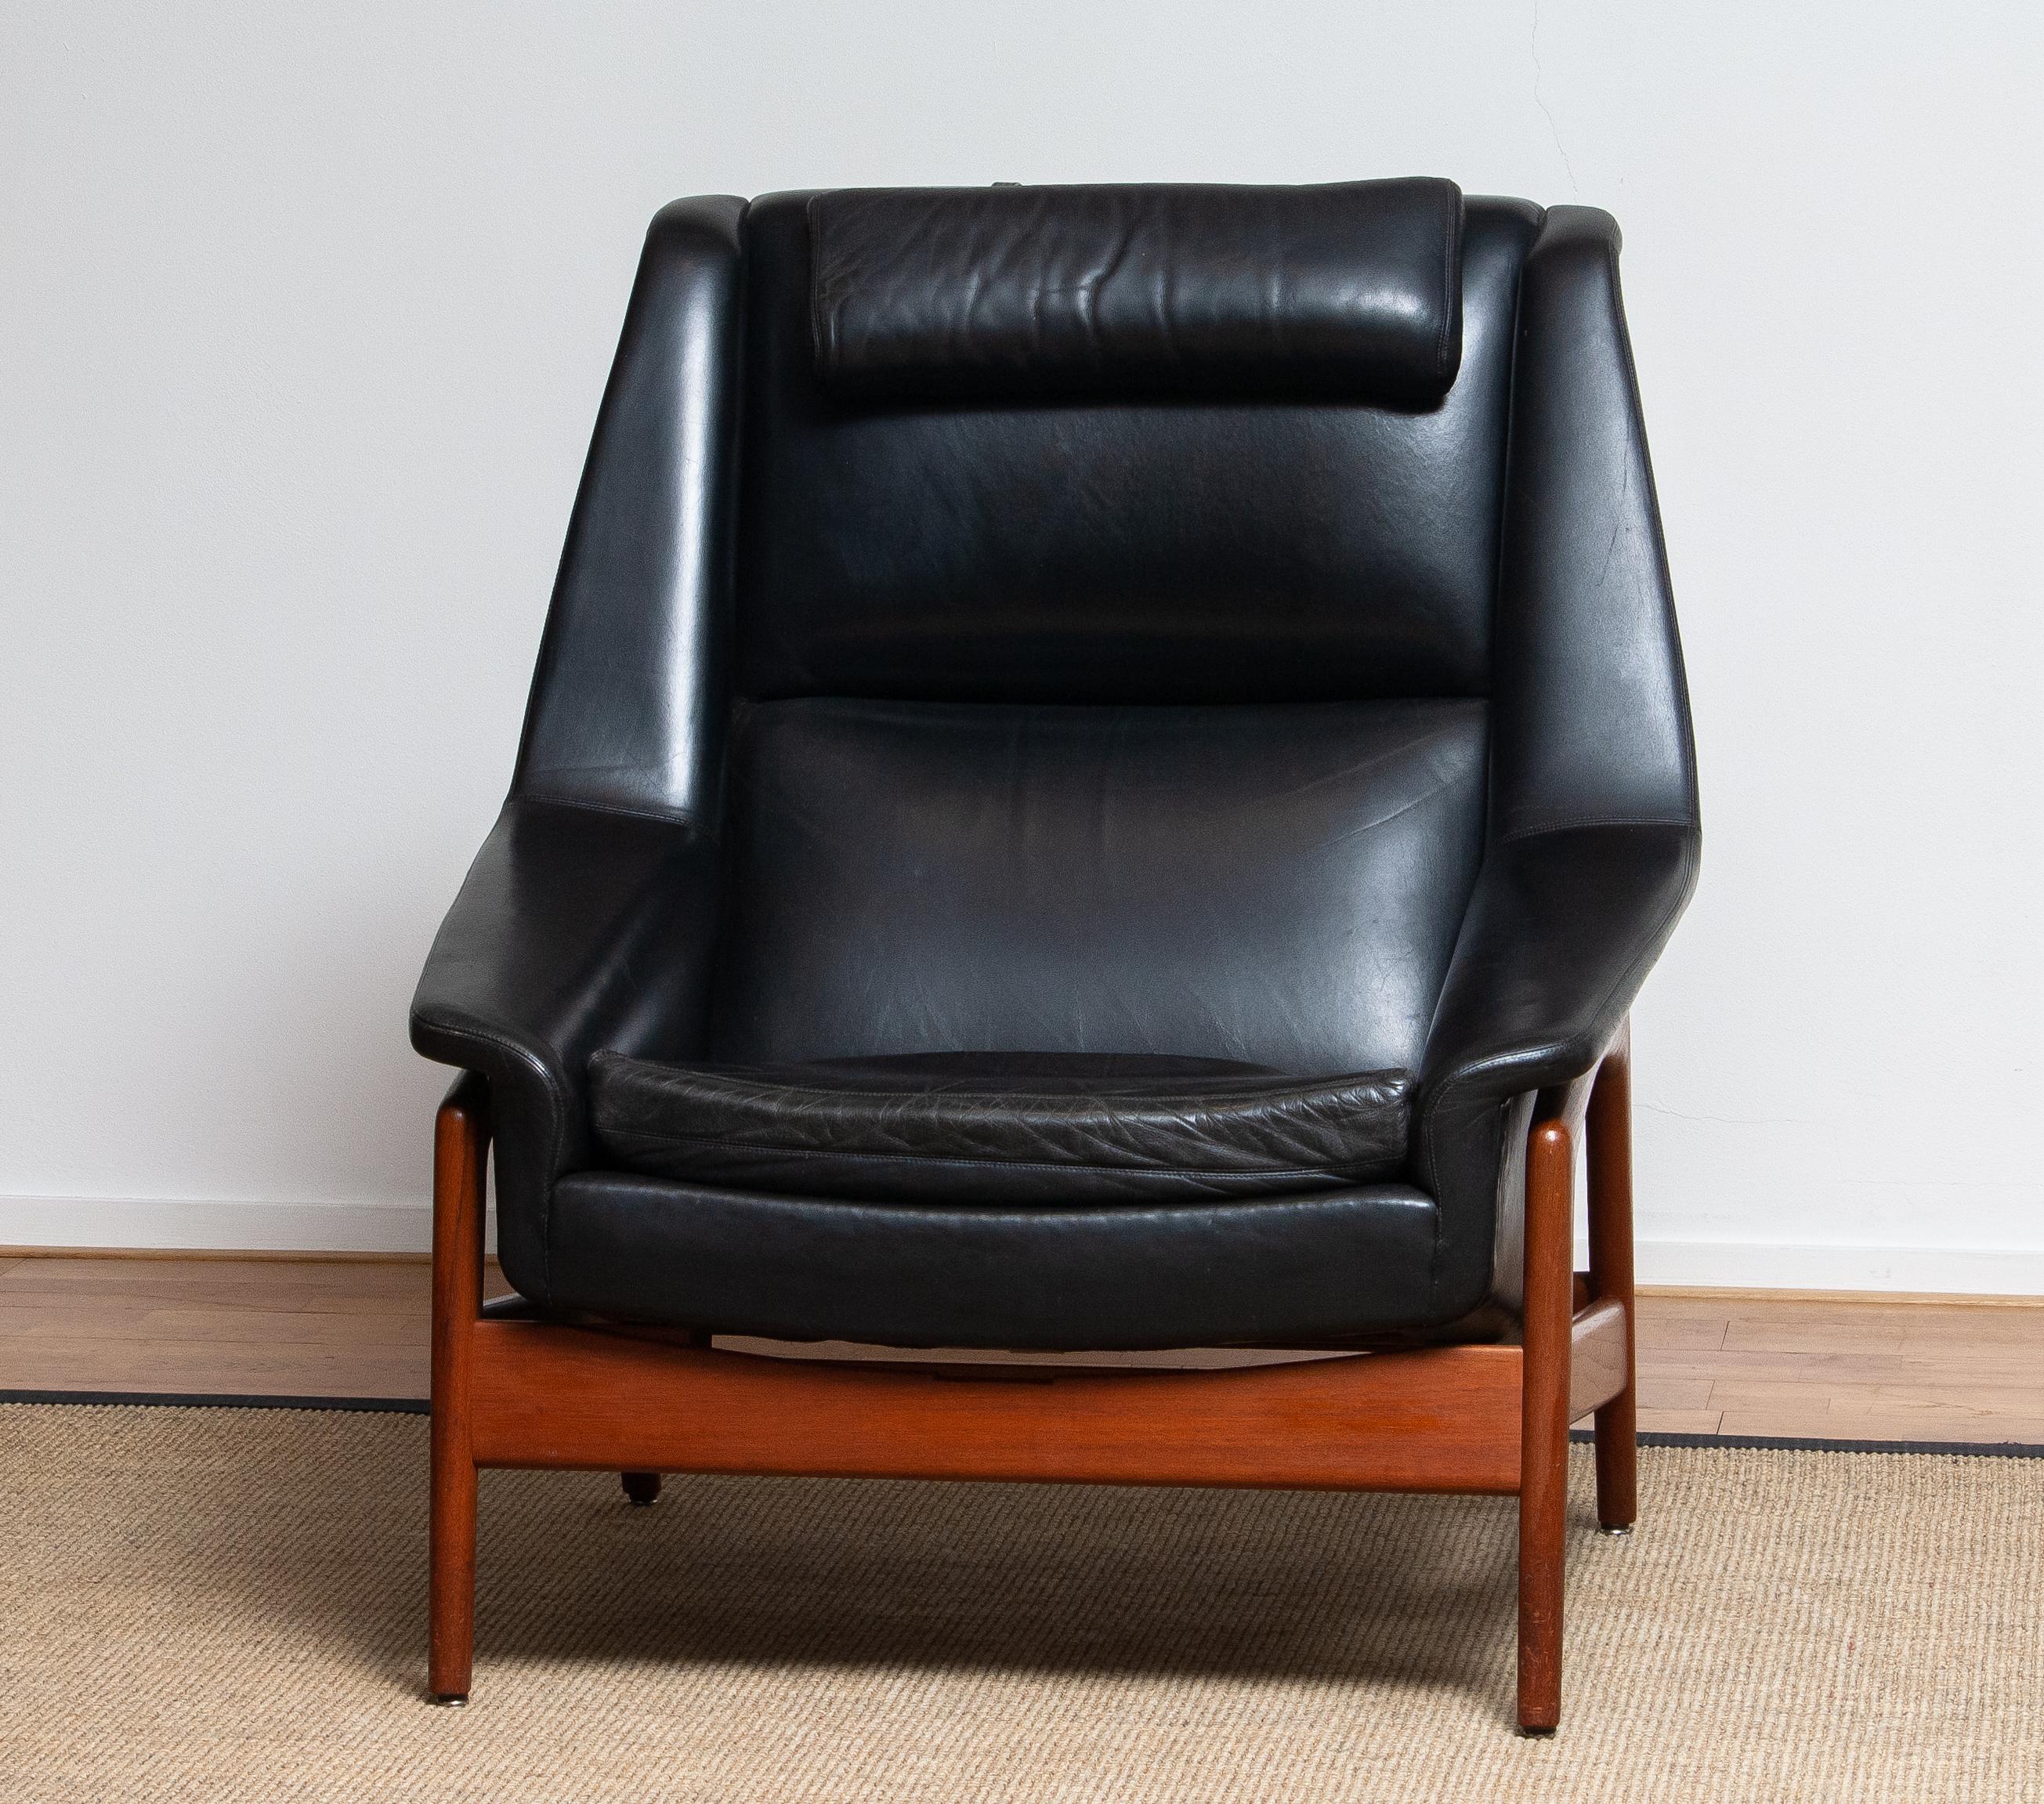 1960s, Lounge Chair Profil by Folke Ohlsson for DUX in Black Leather and Teak 6